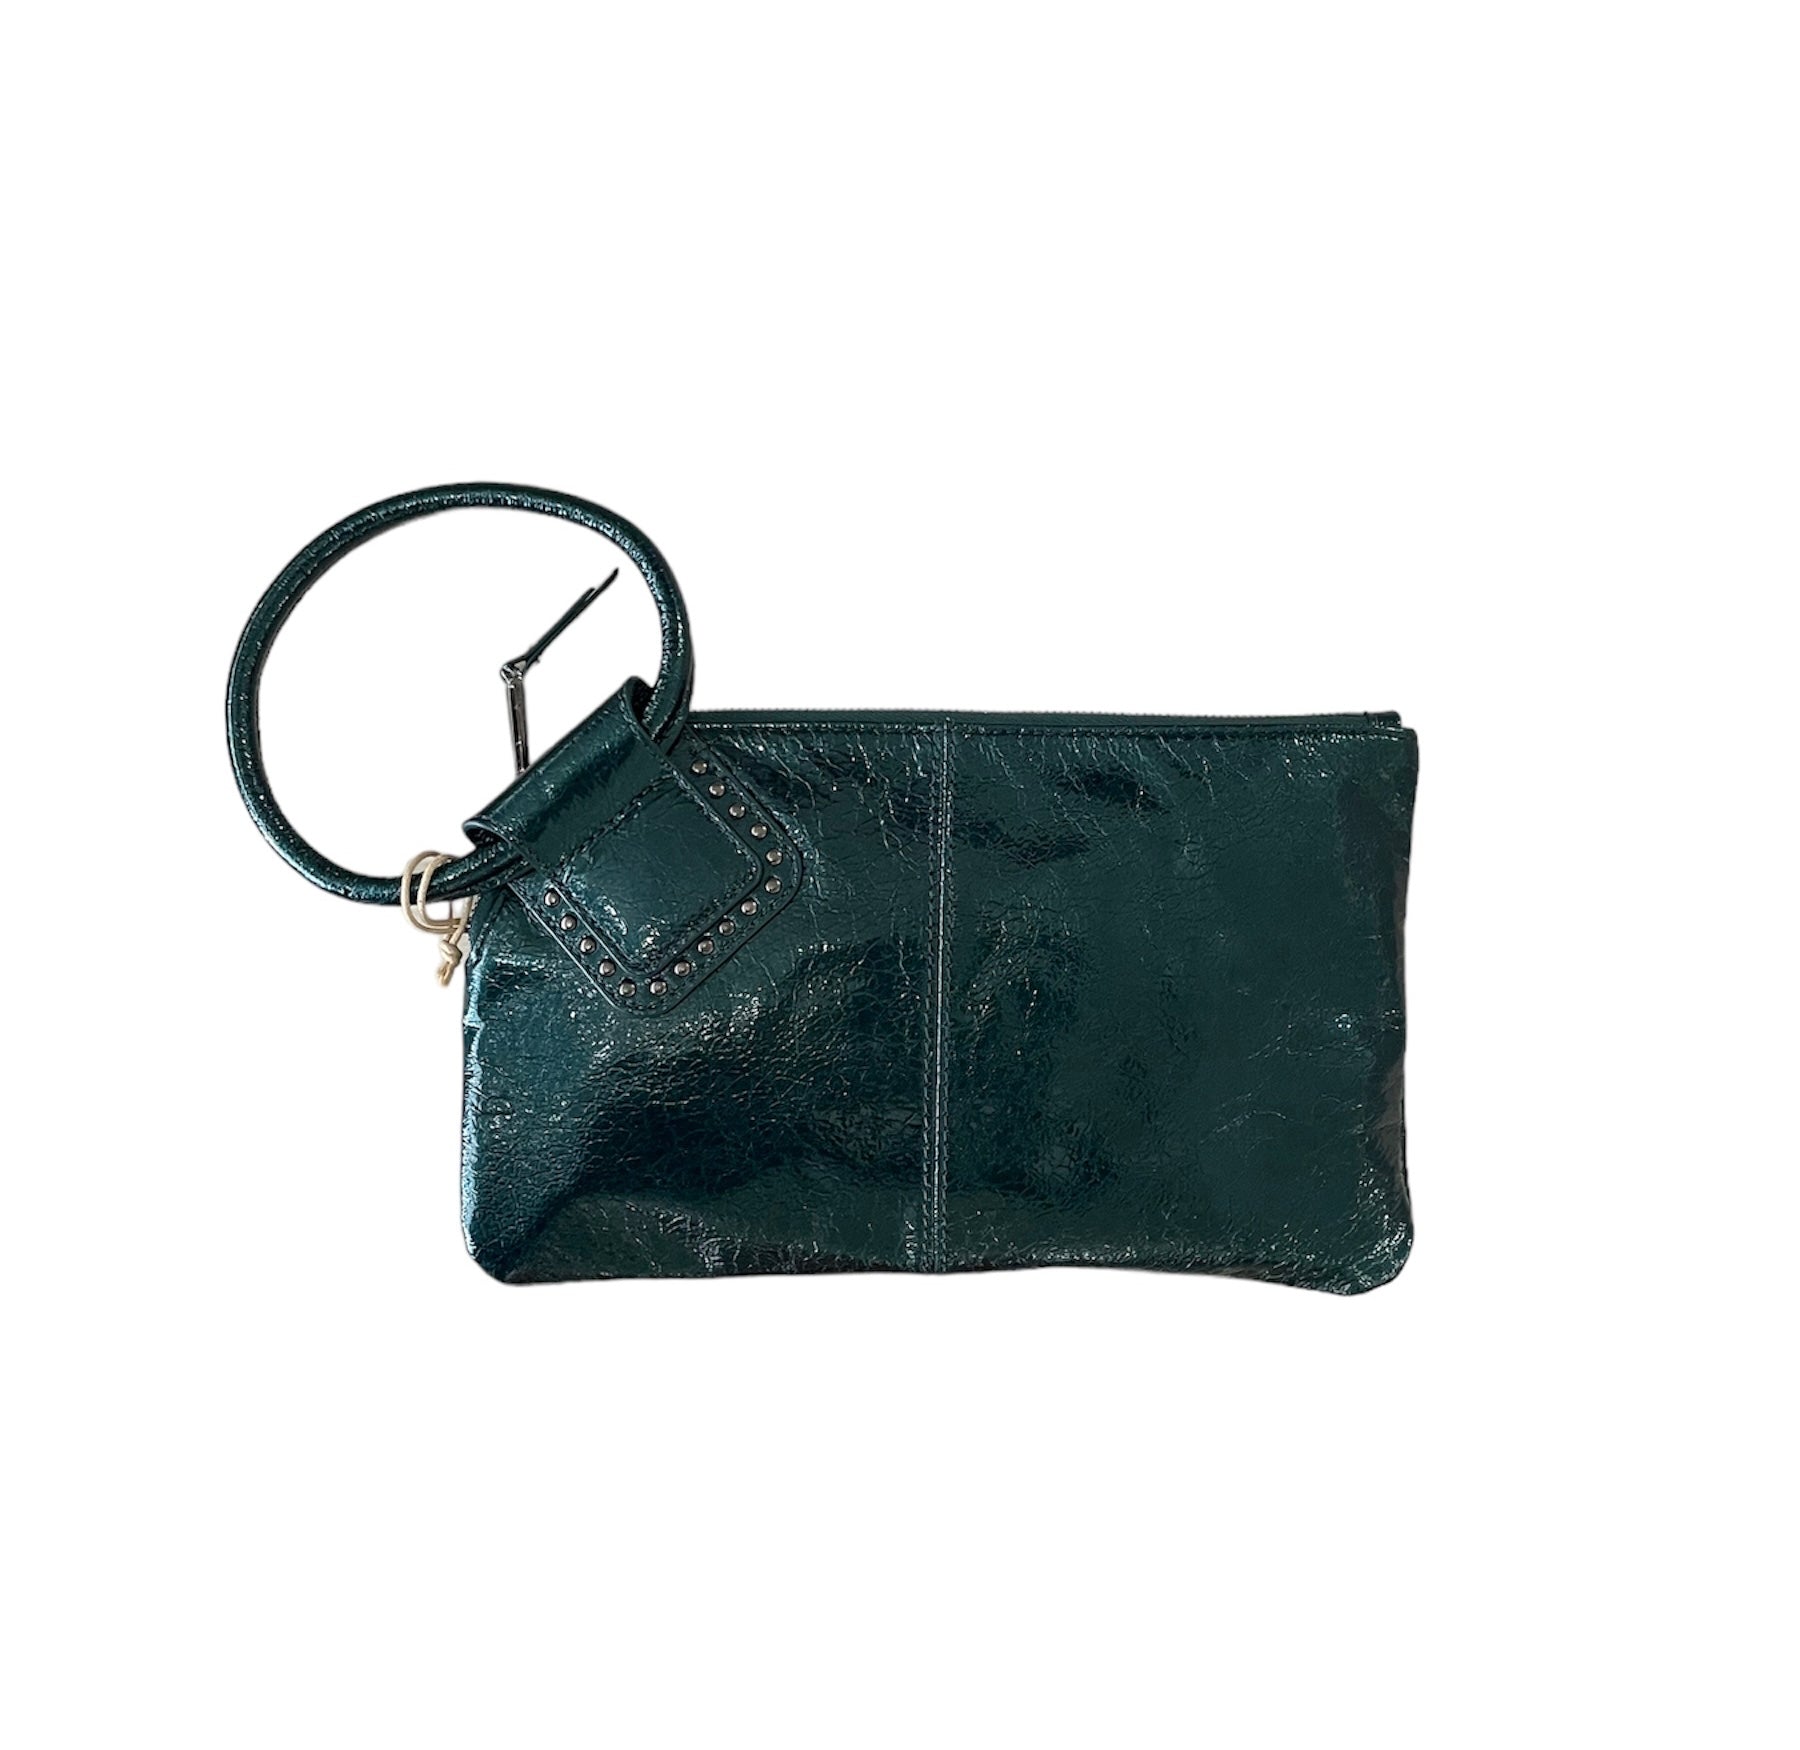 Sable Hobo Wristlet in Spruce Patent Leather